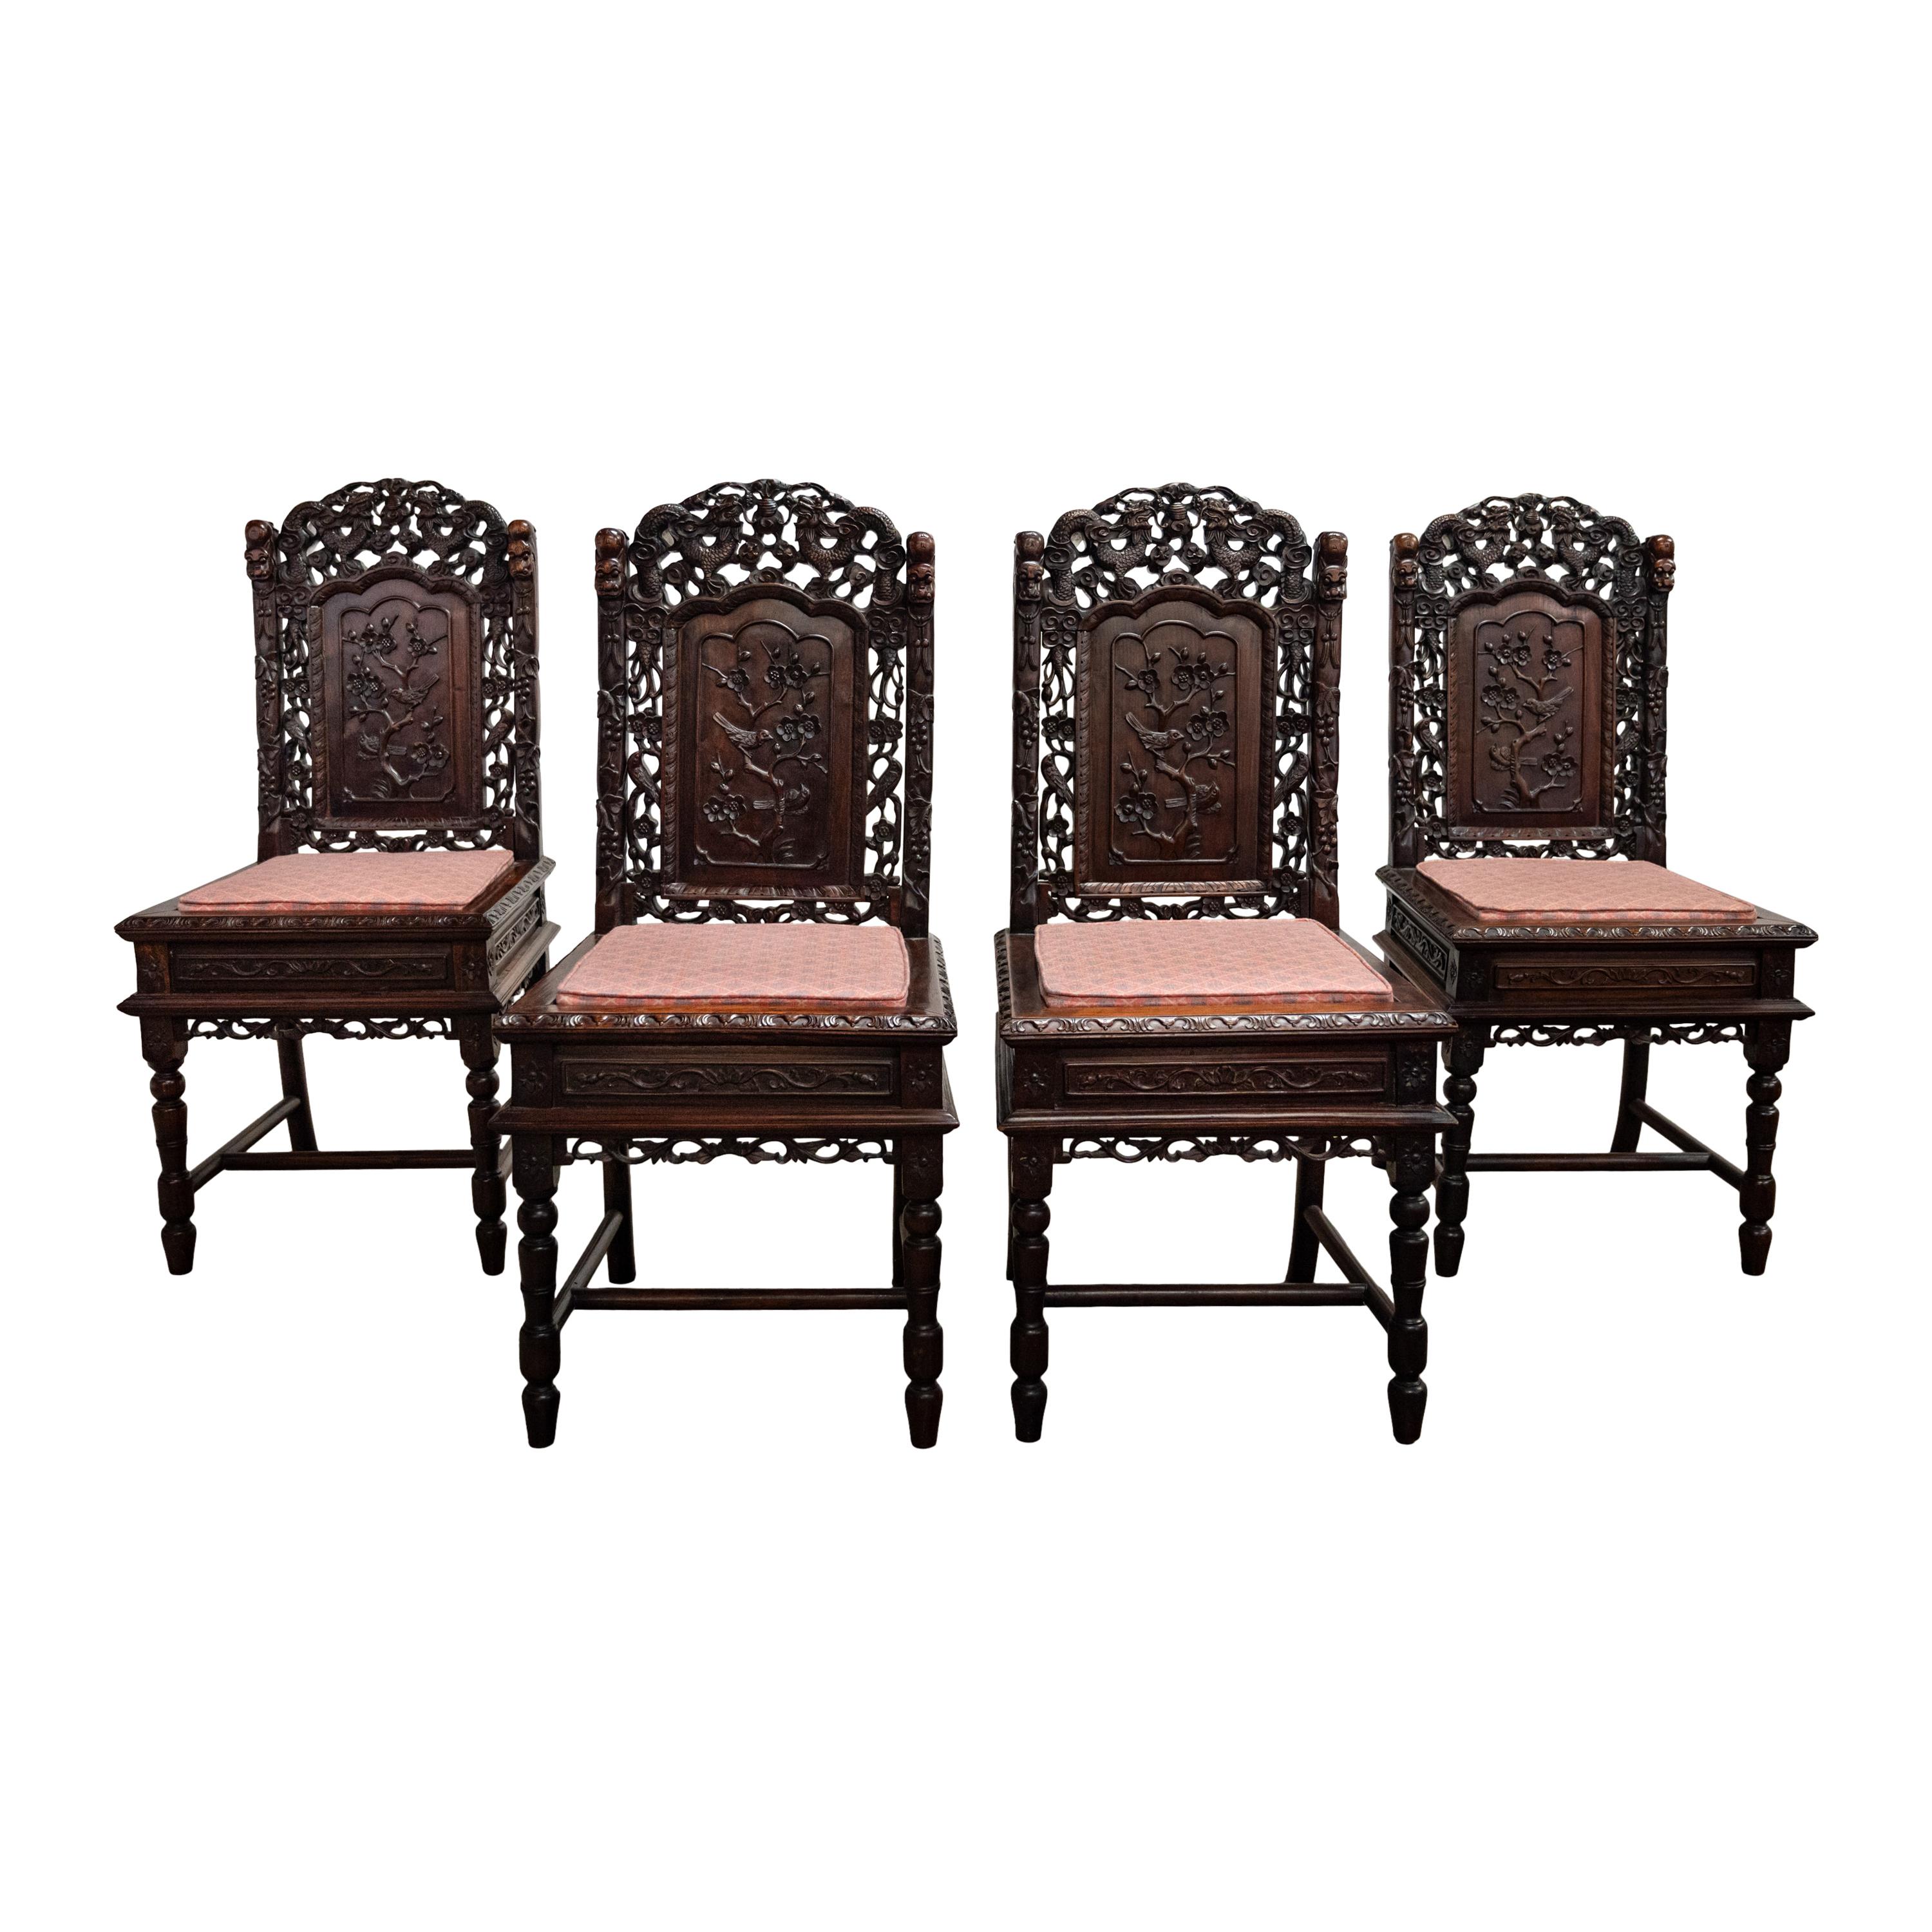 Four Antique Qing Dynasty Chinese Carved Rosewood Side Dining Dragon Chairs 1880 In Good Condition For Sale In Portland, OR